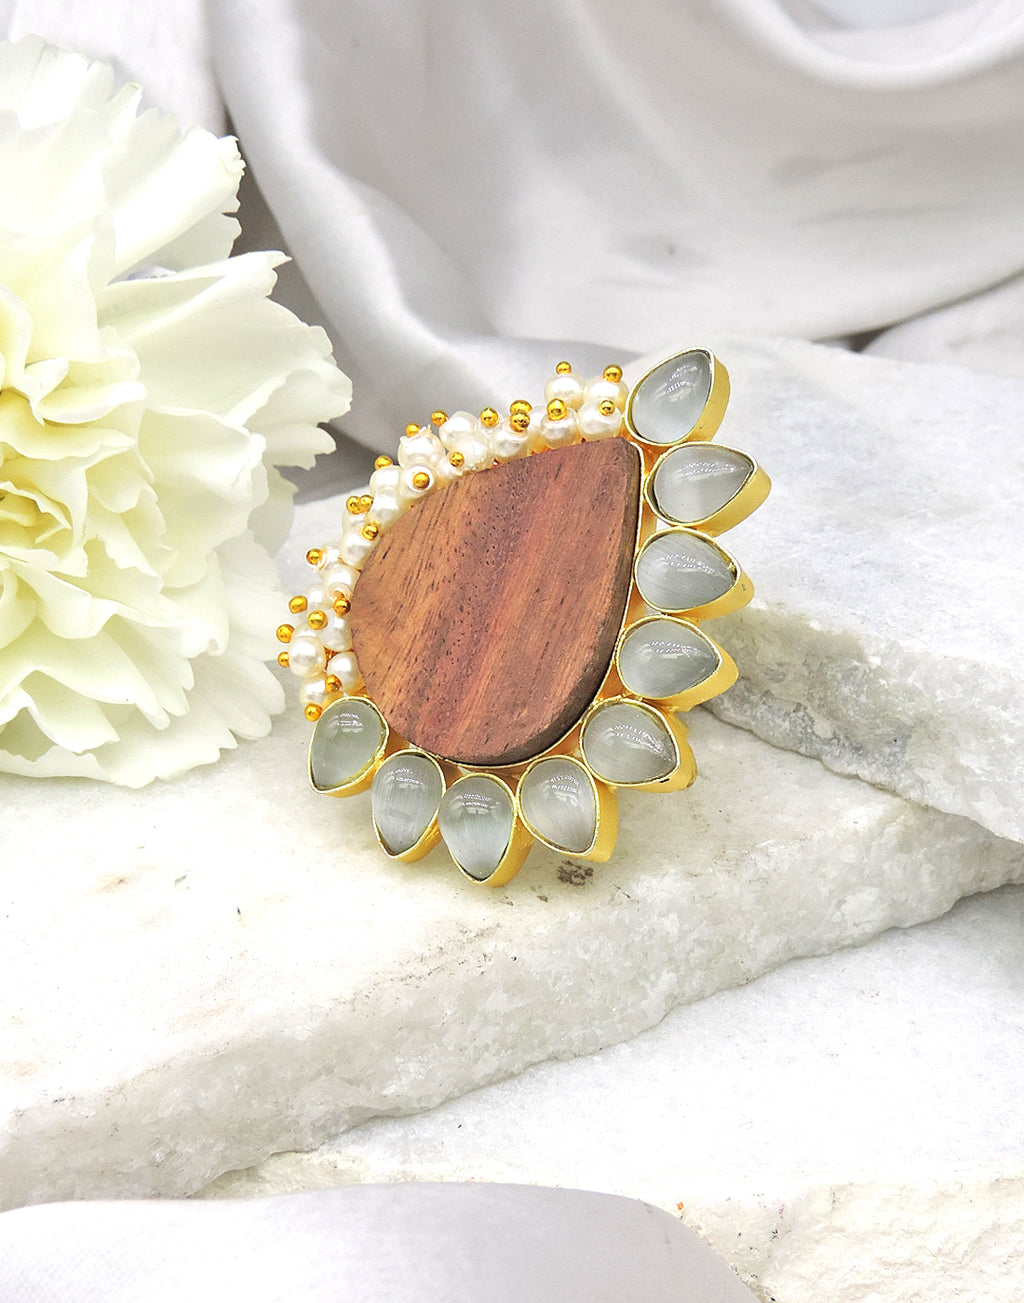 Floral Wood Ring | Grey & Blue - Statement Rings - Gold-Plated & Hypoallergenic Jewellery - Made in India - Dubai Jewellery - Dori